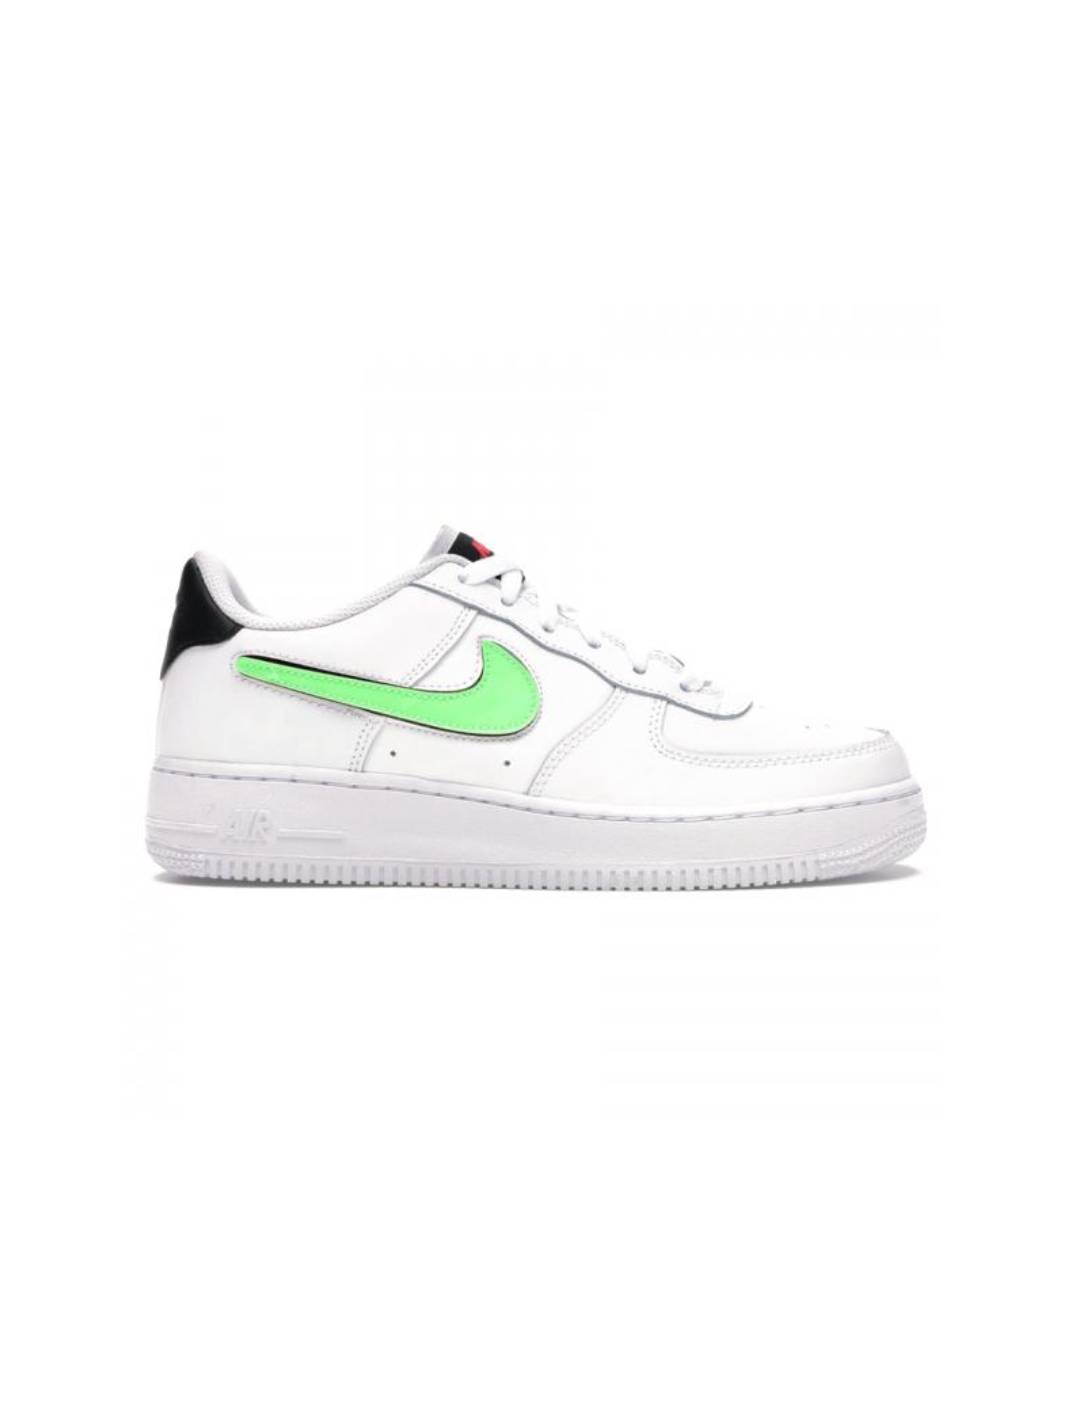 Nike Air Force 1 LV8 3 (GS) Shoes Size 4Y White/Black Strike Style